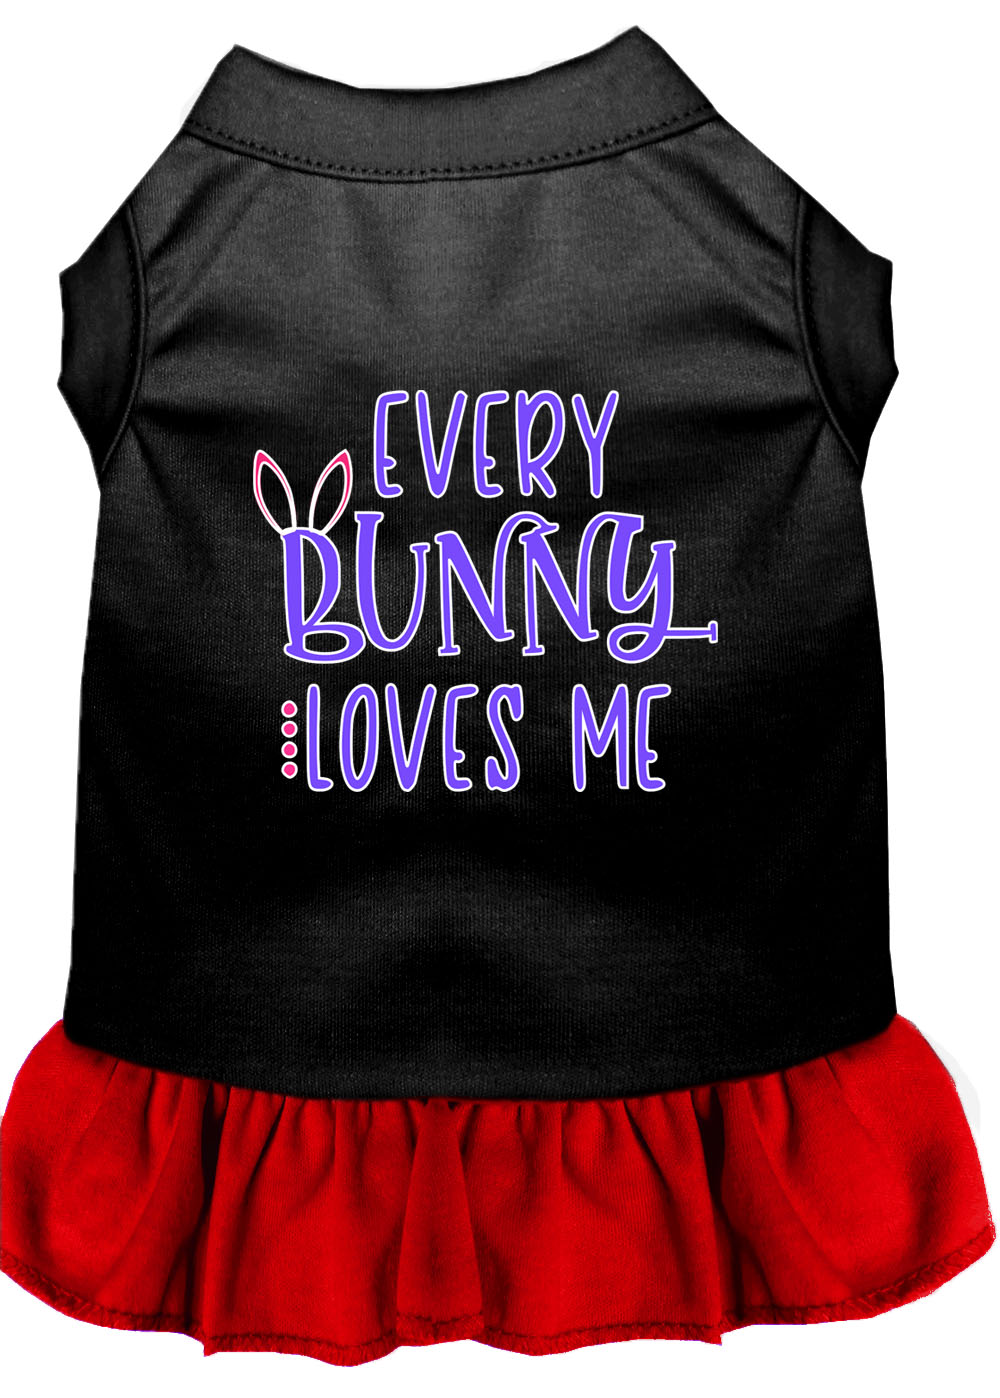 Every Bunny Loves me Screen Print Dog Dress Black with Red Med